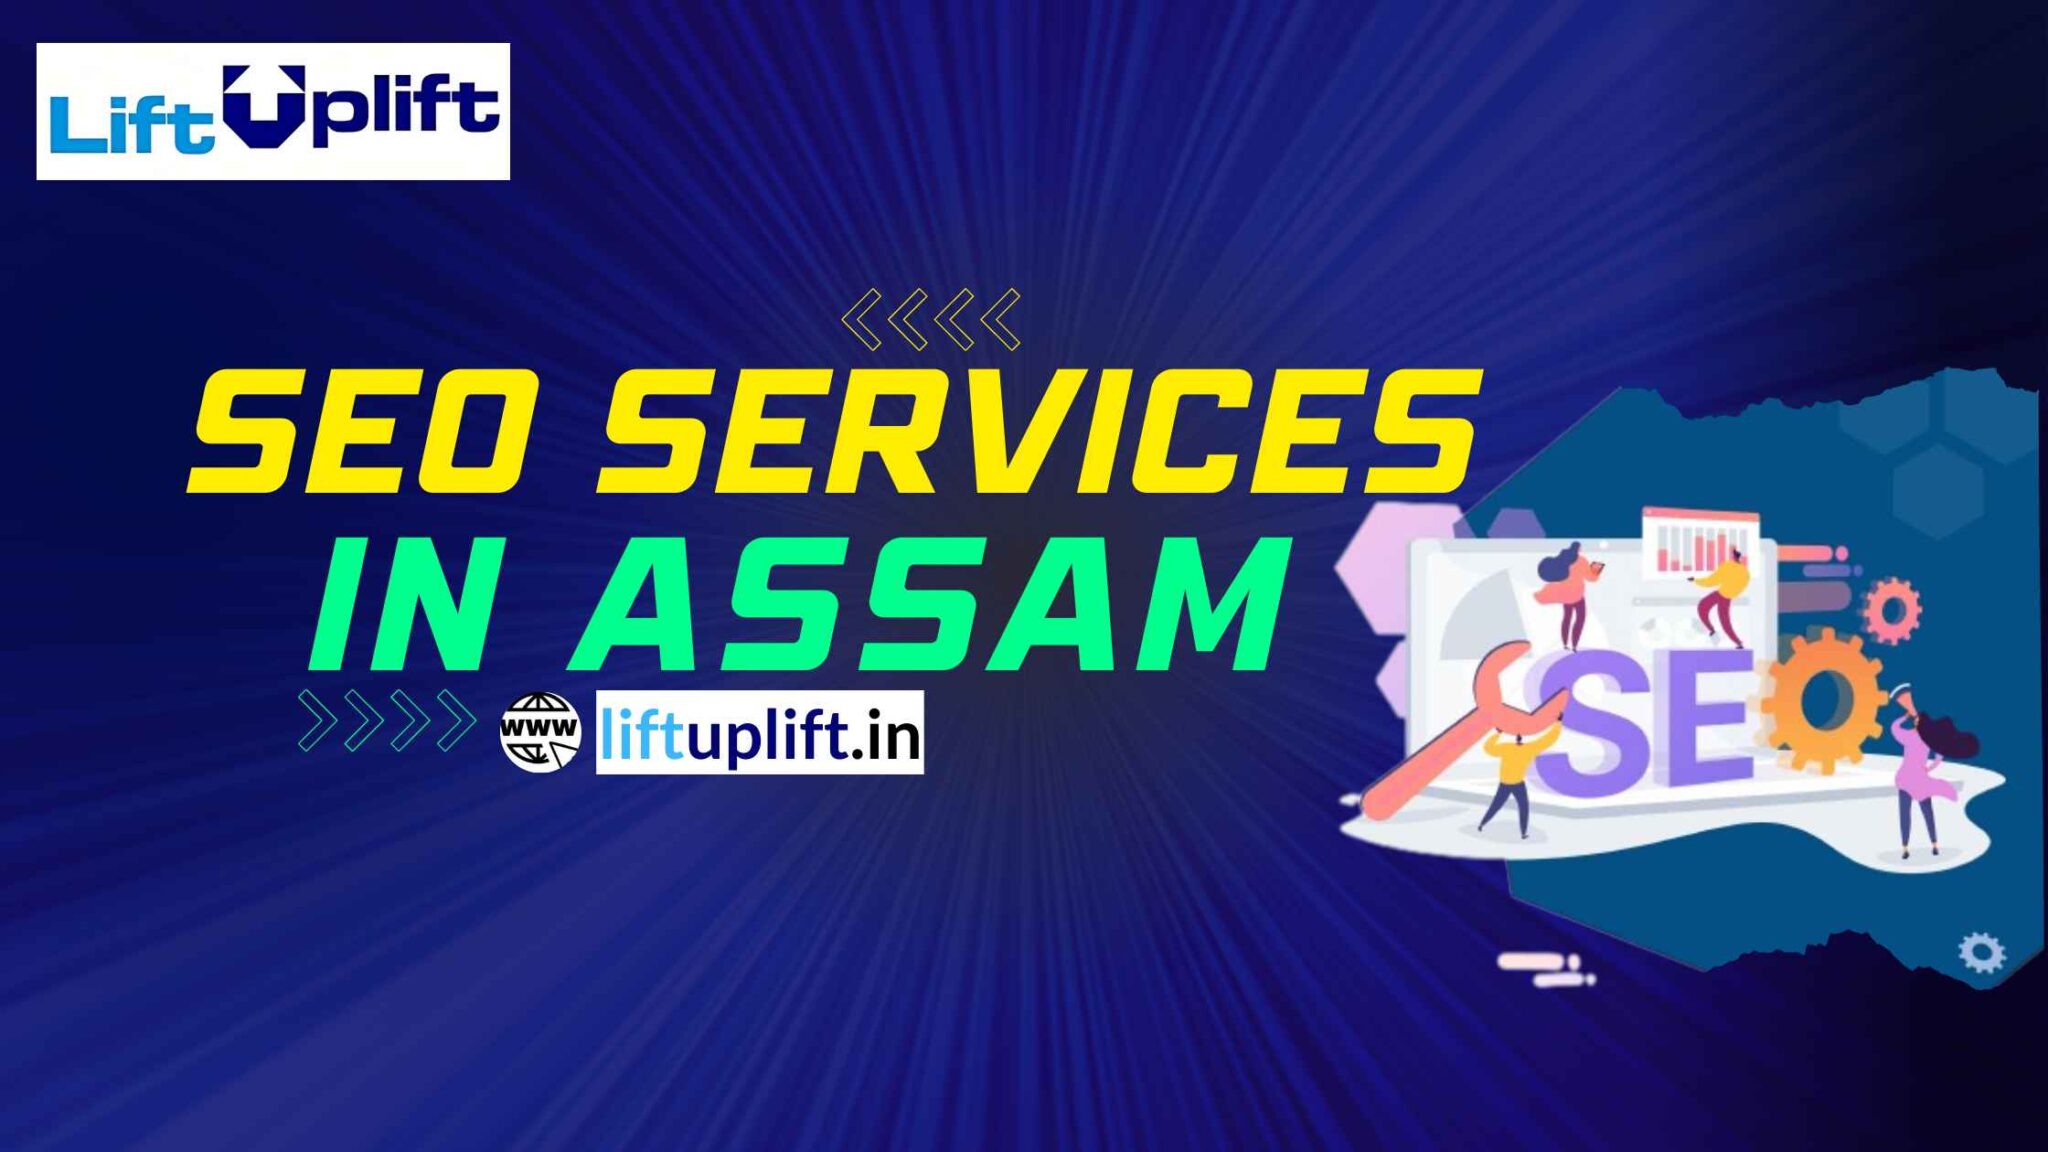 SEO services in Assam